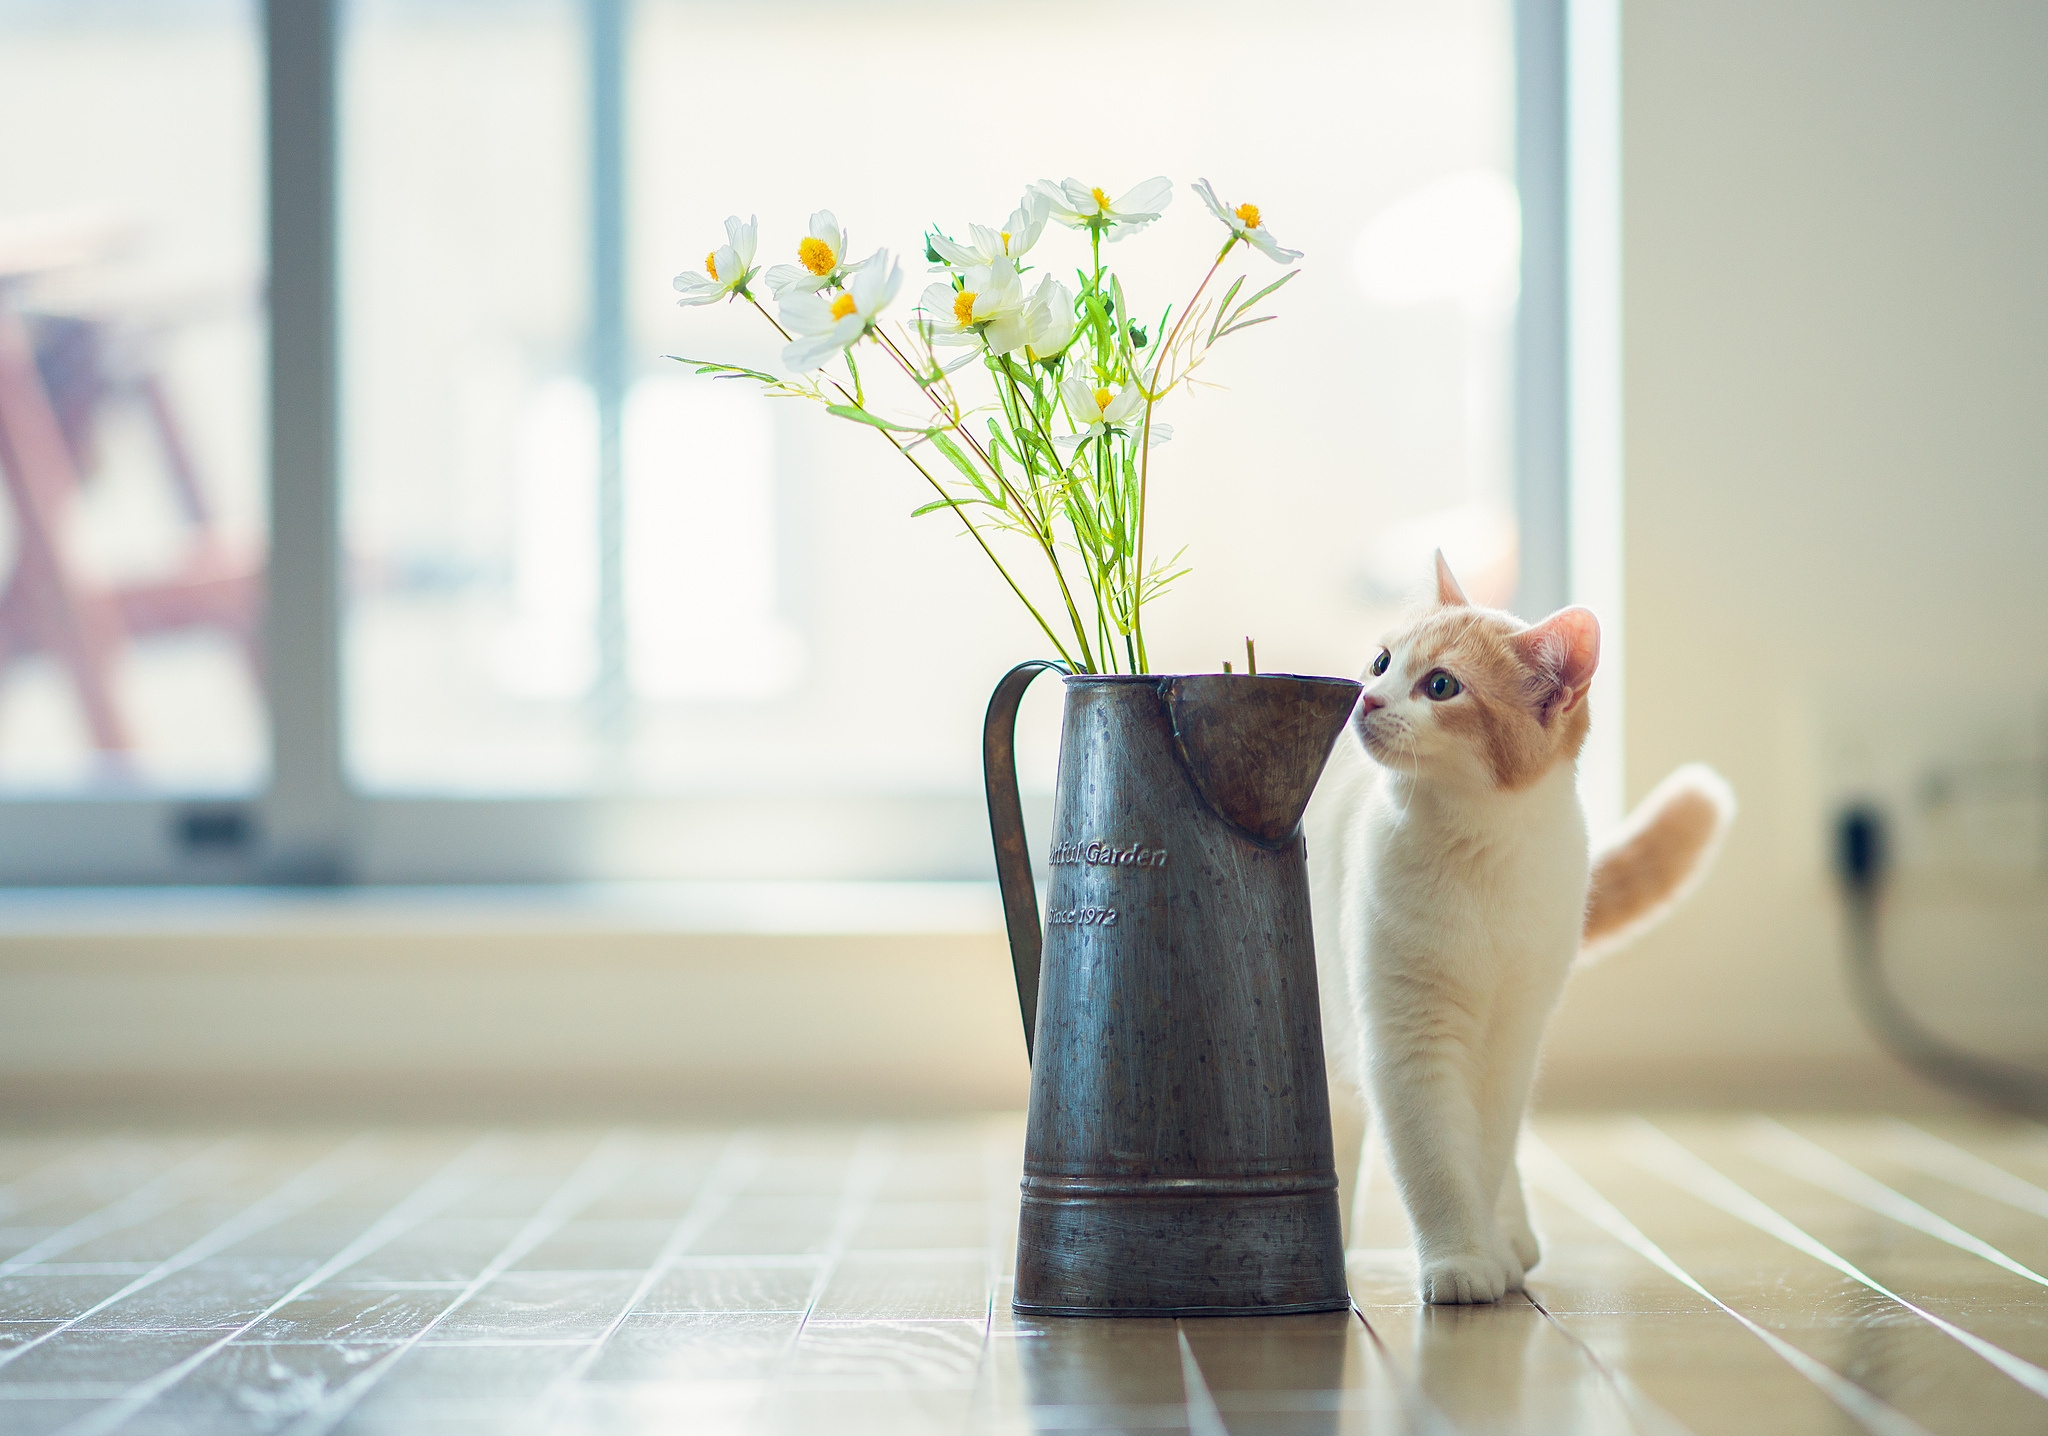 Free photo A little kitten next to a vase of flowers.